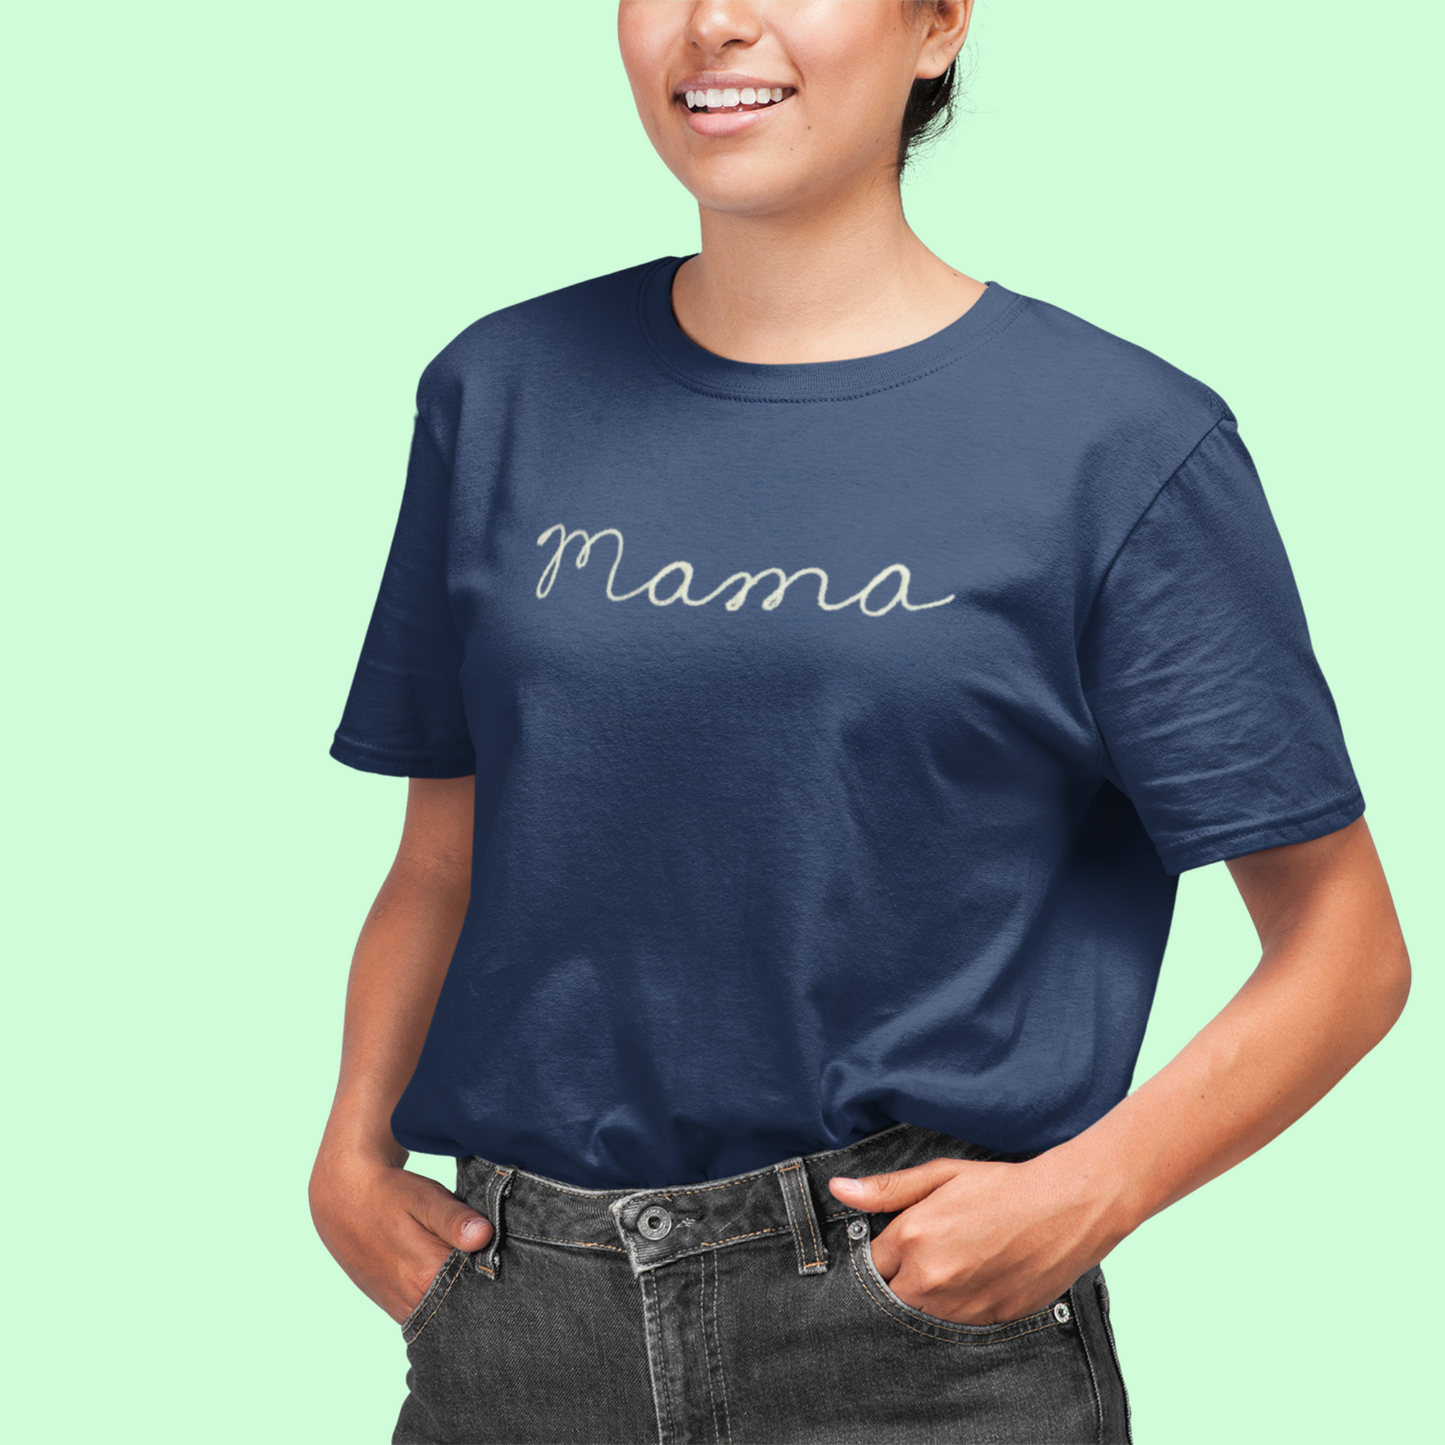 The Adult Chainstitch T-Shirt - Navy